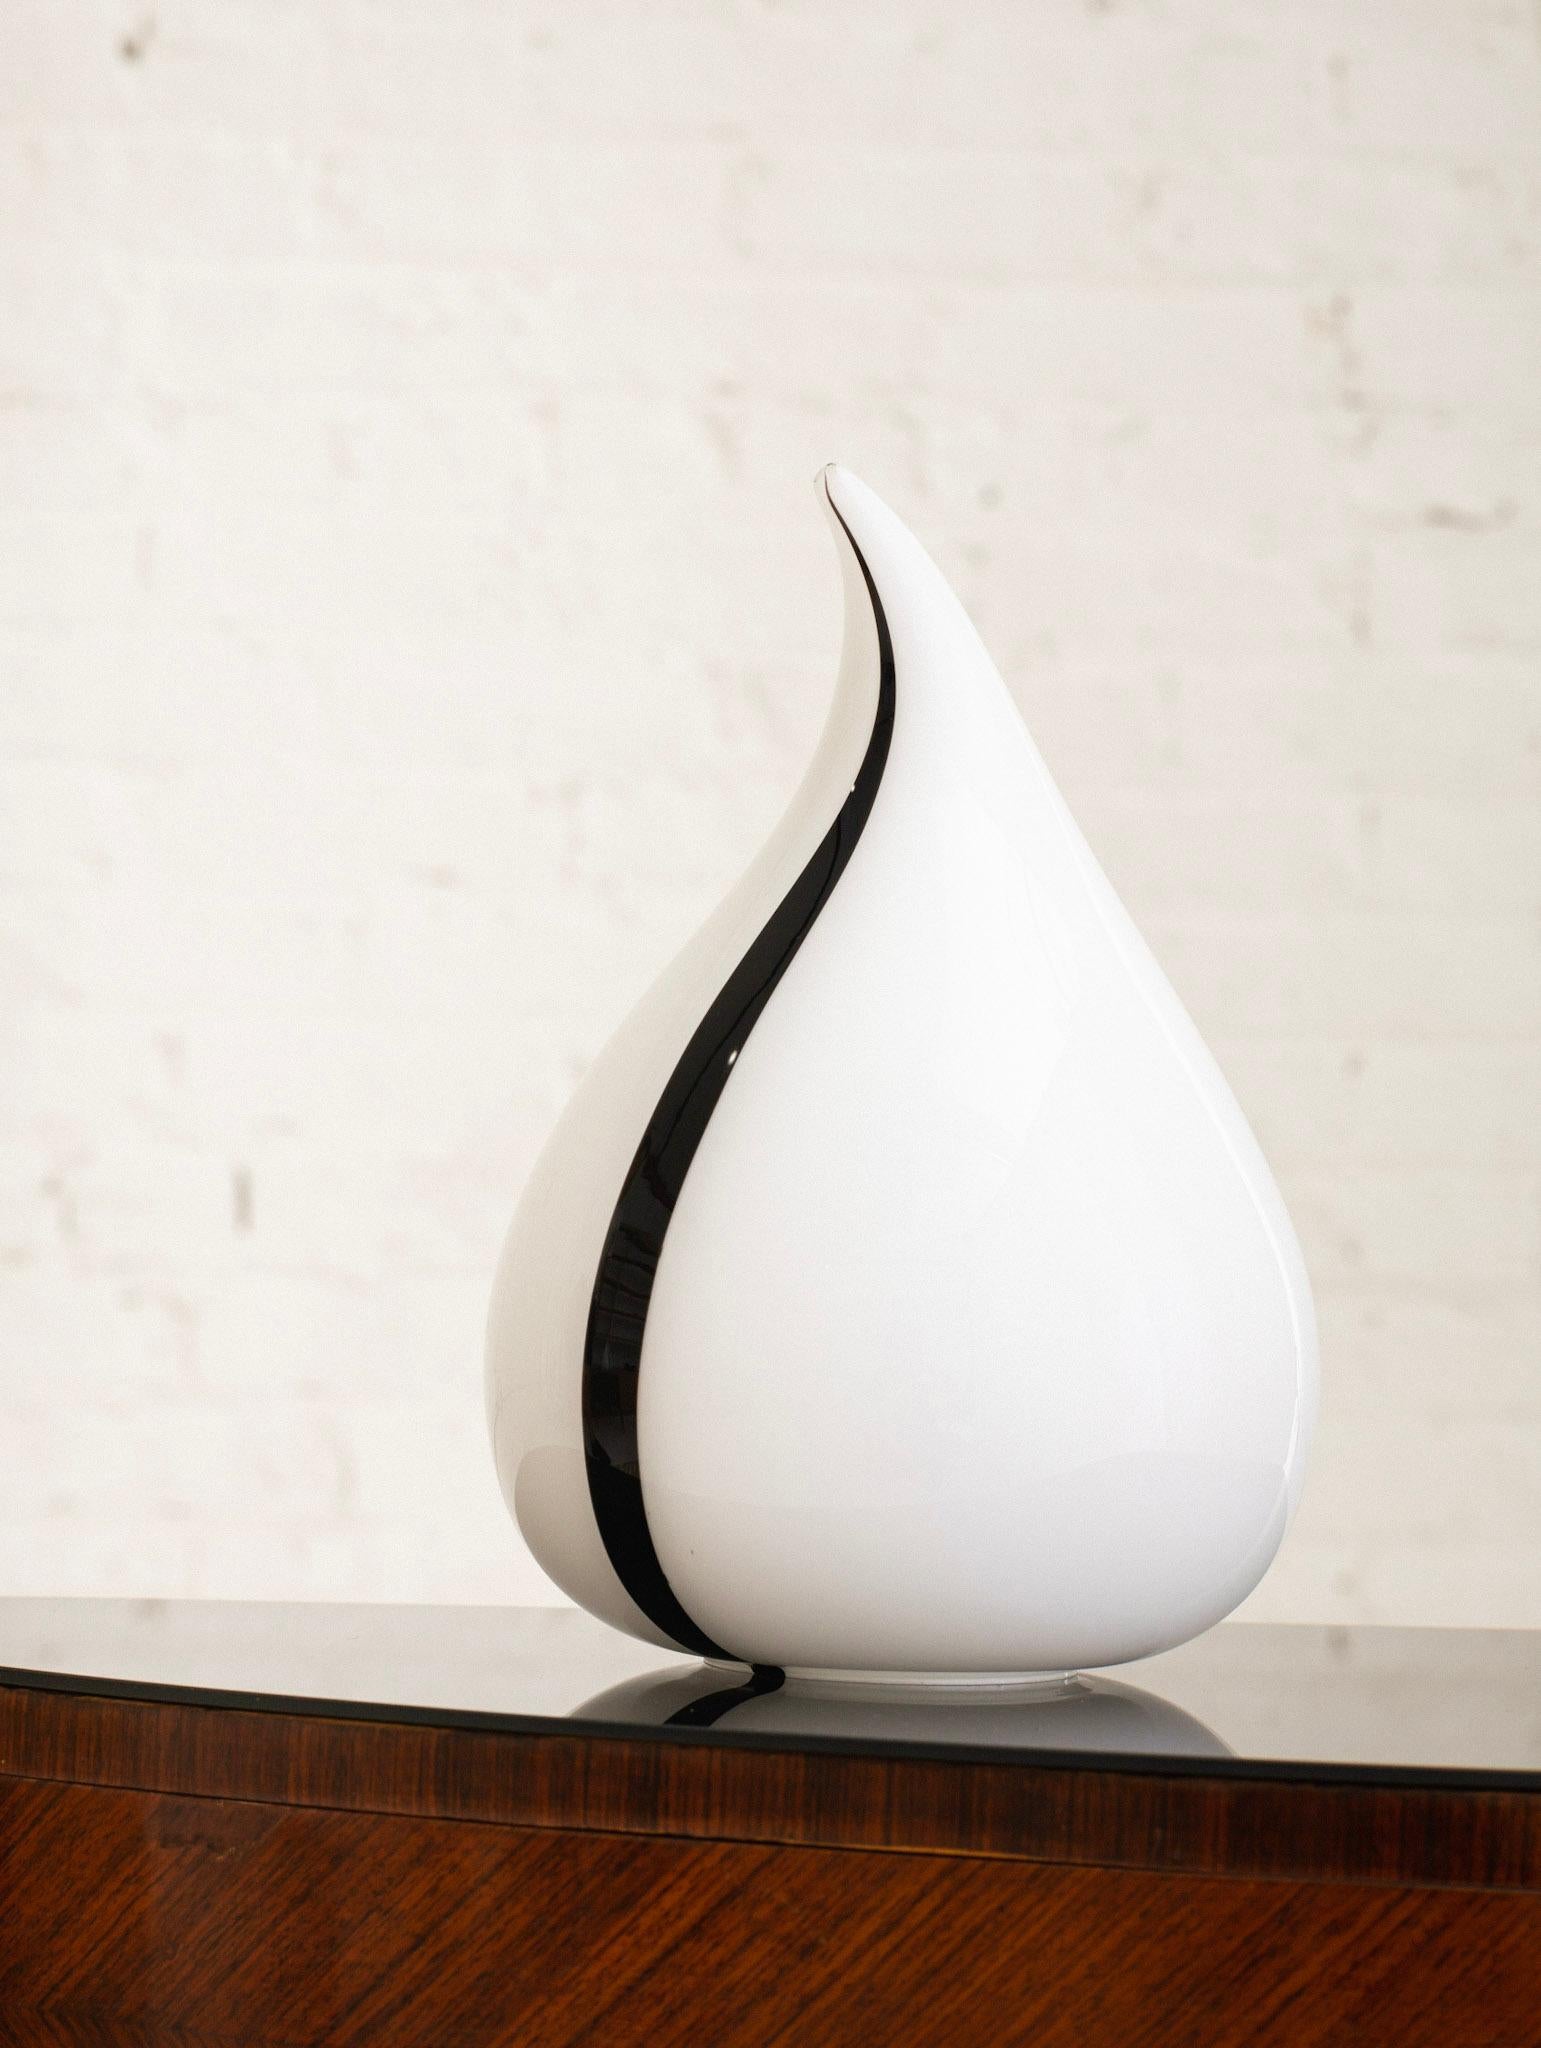 Murano glass drip or tear drop form table lamp. White color with black stripe detail. Sourced in Milan, Italy. Pair available, sold separately.